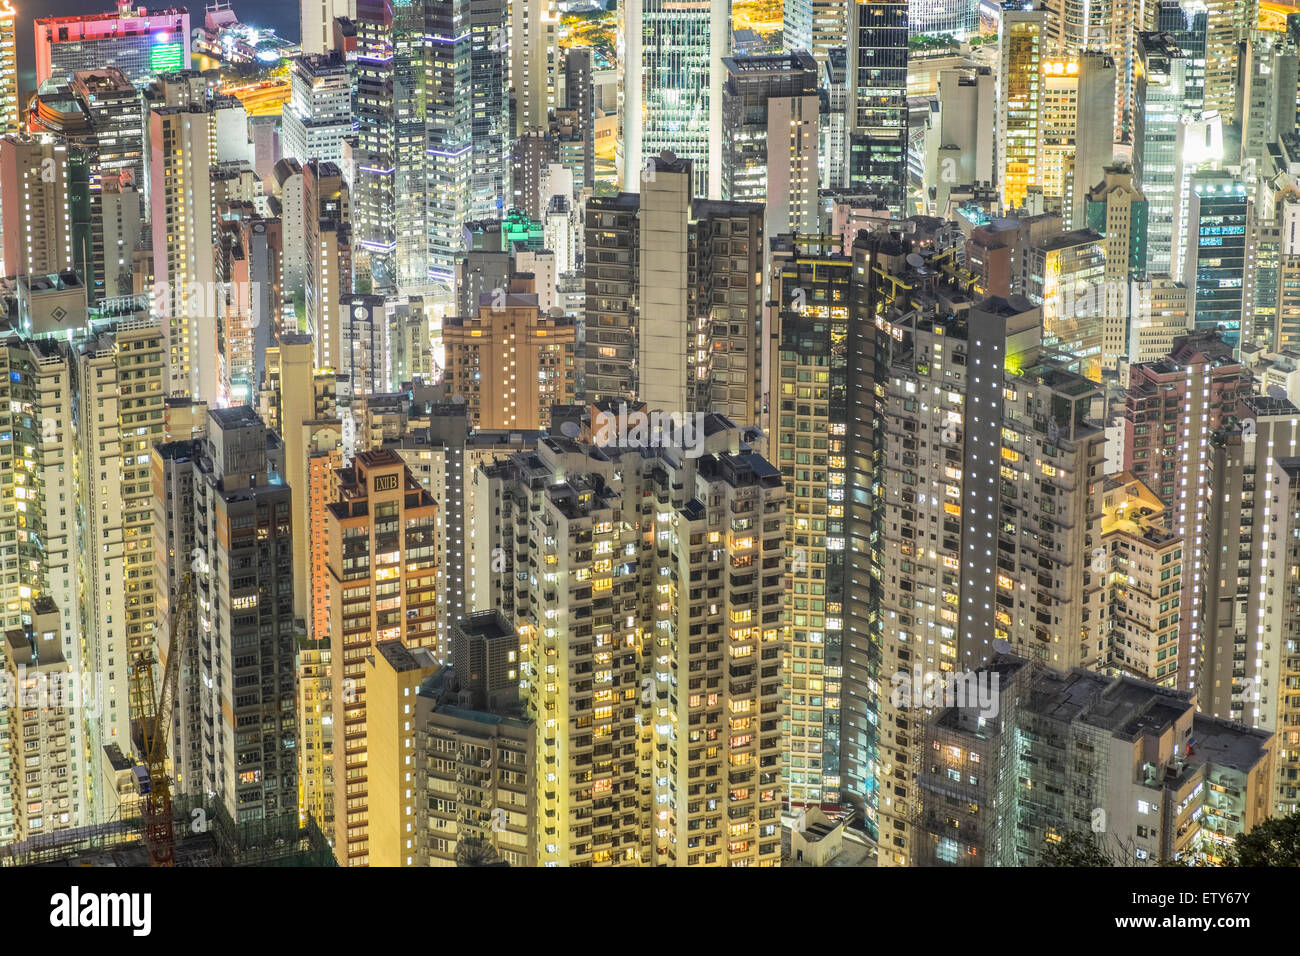 Night view of many high-rise apartment buildings in dense urban district of Hong Kong China Stock Photo